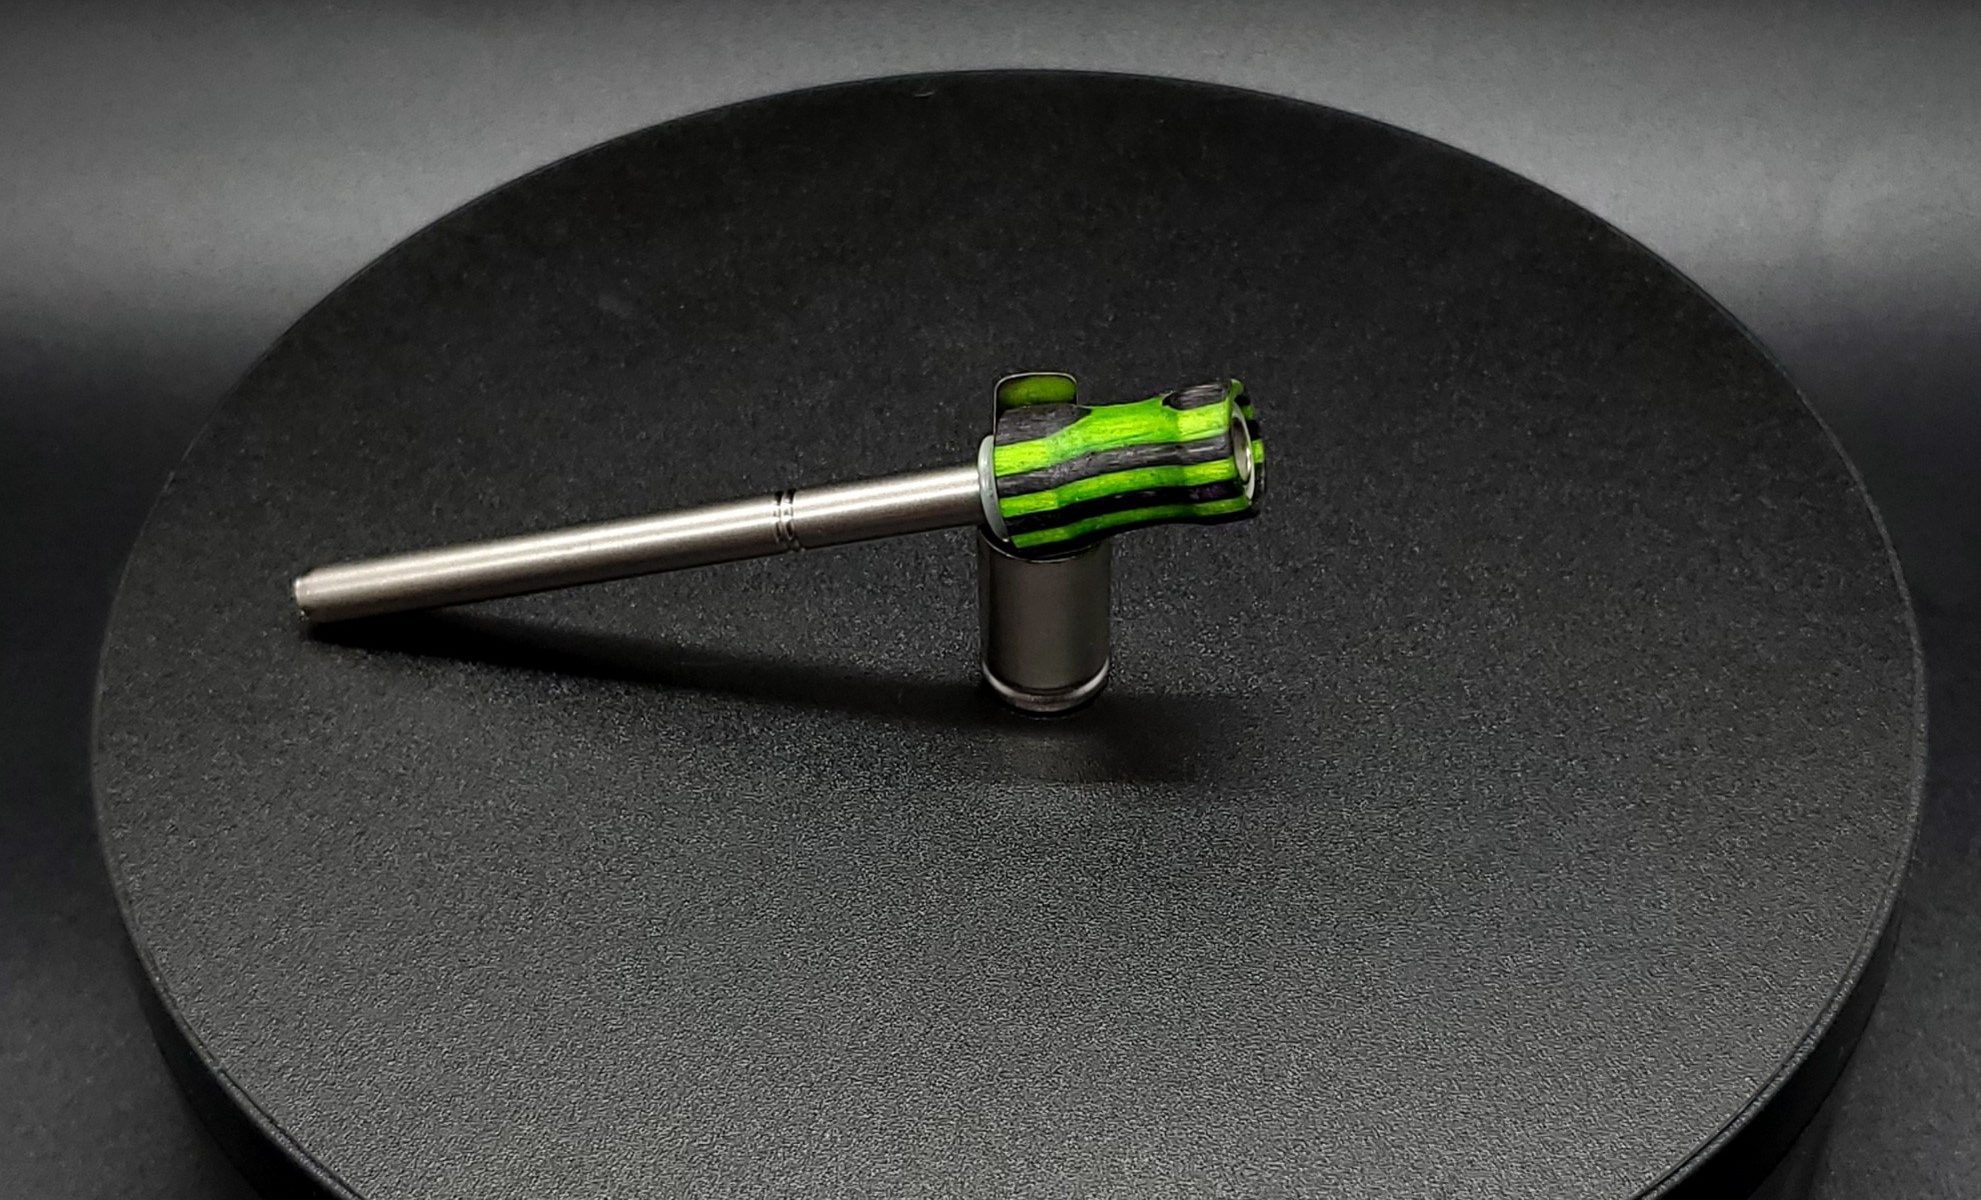 This image portrays Dynavap Spinning Mouthpiece-Dovetail Green/Black by Dovetail Woodwork.